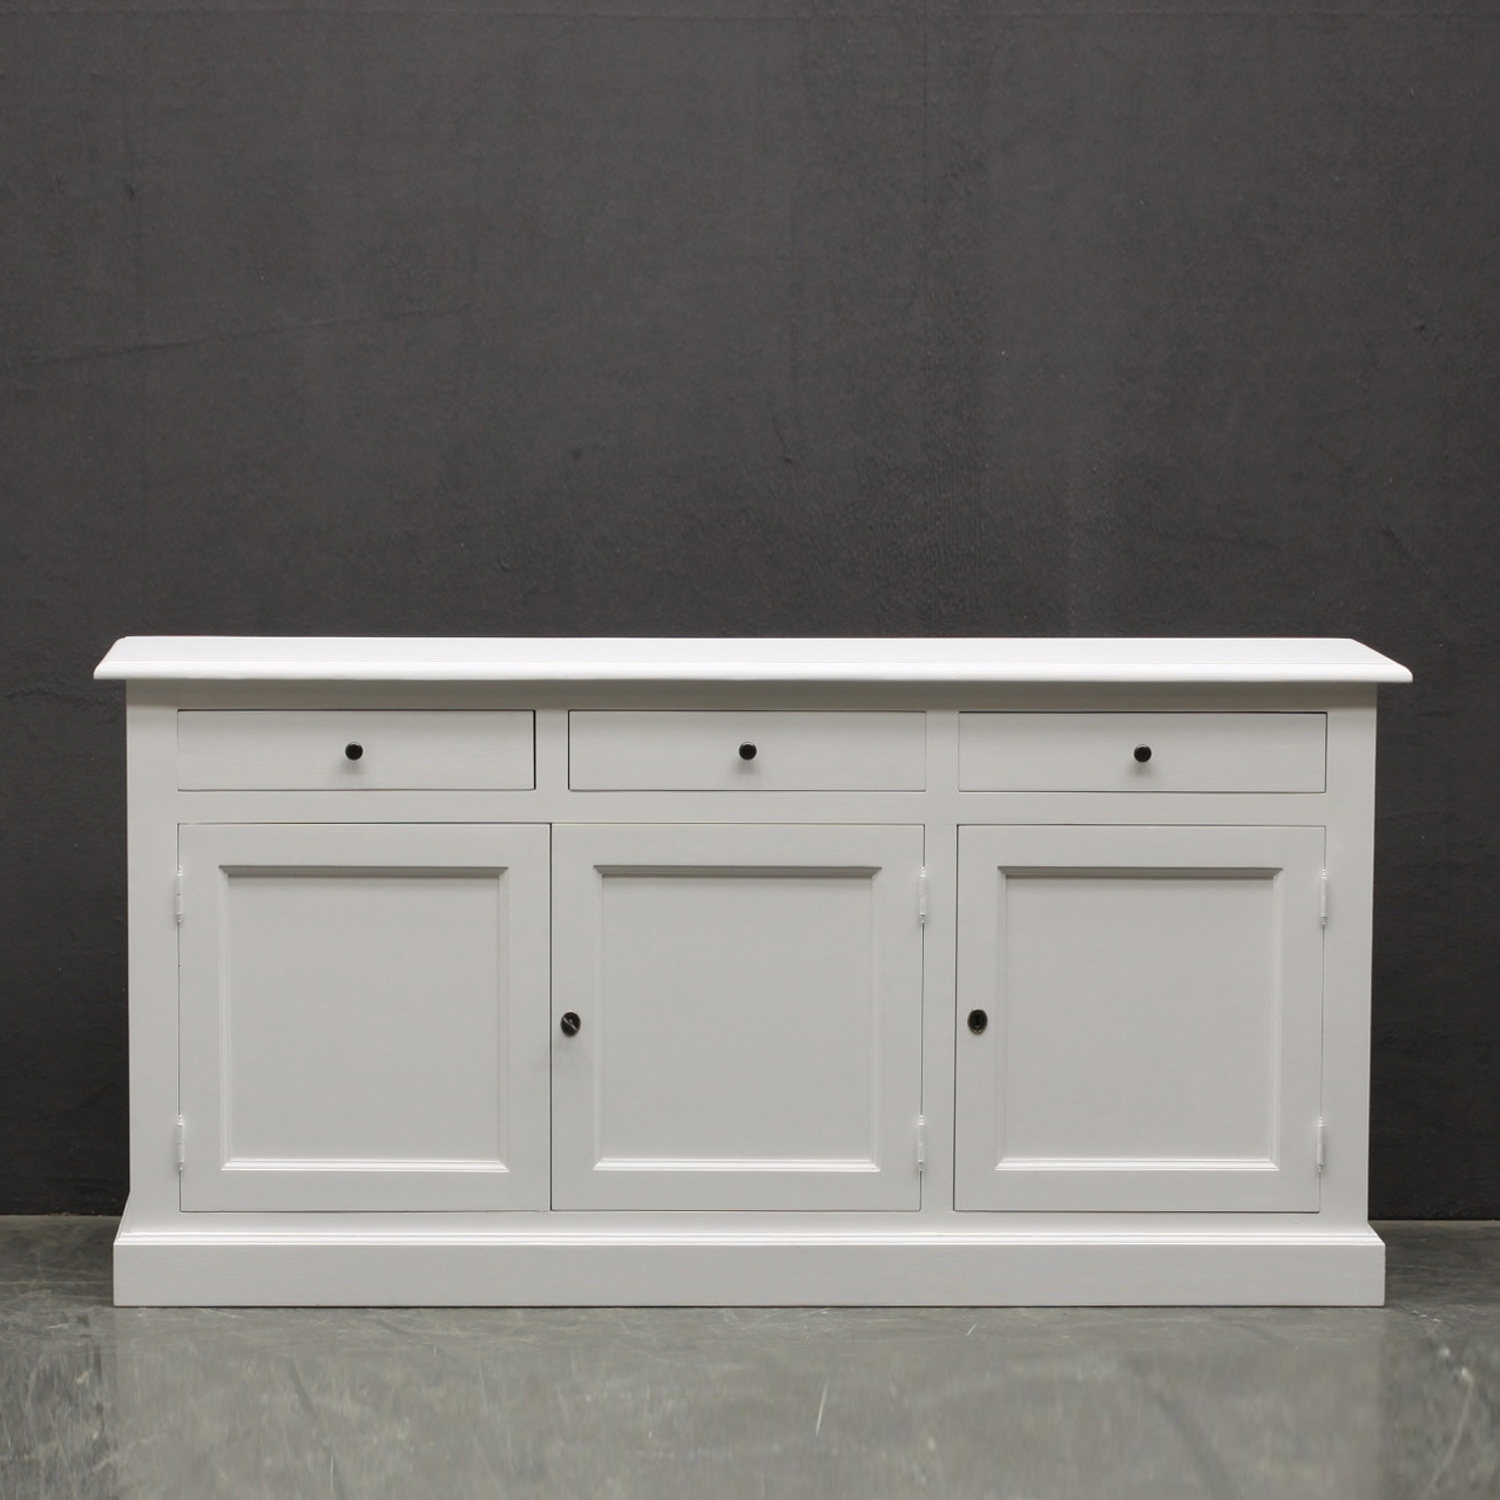 Sideboard Alaint 45D088INF